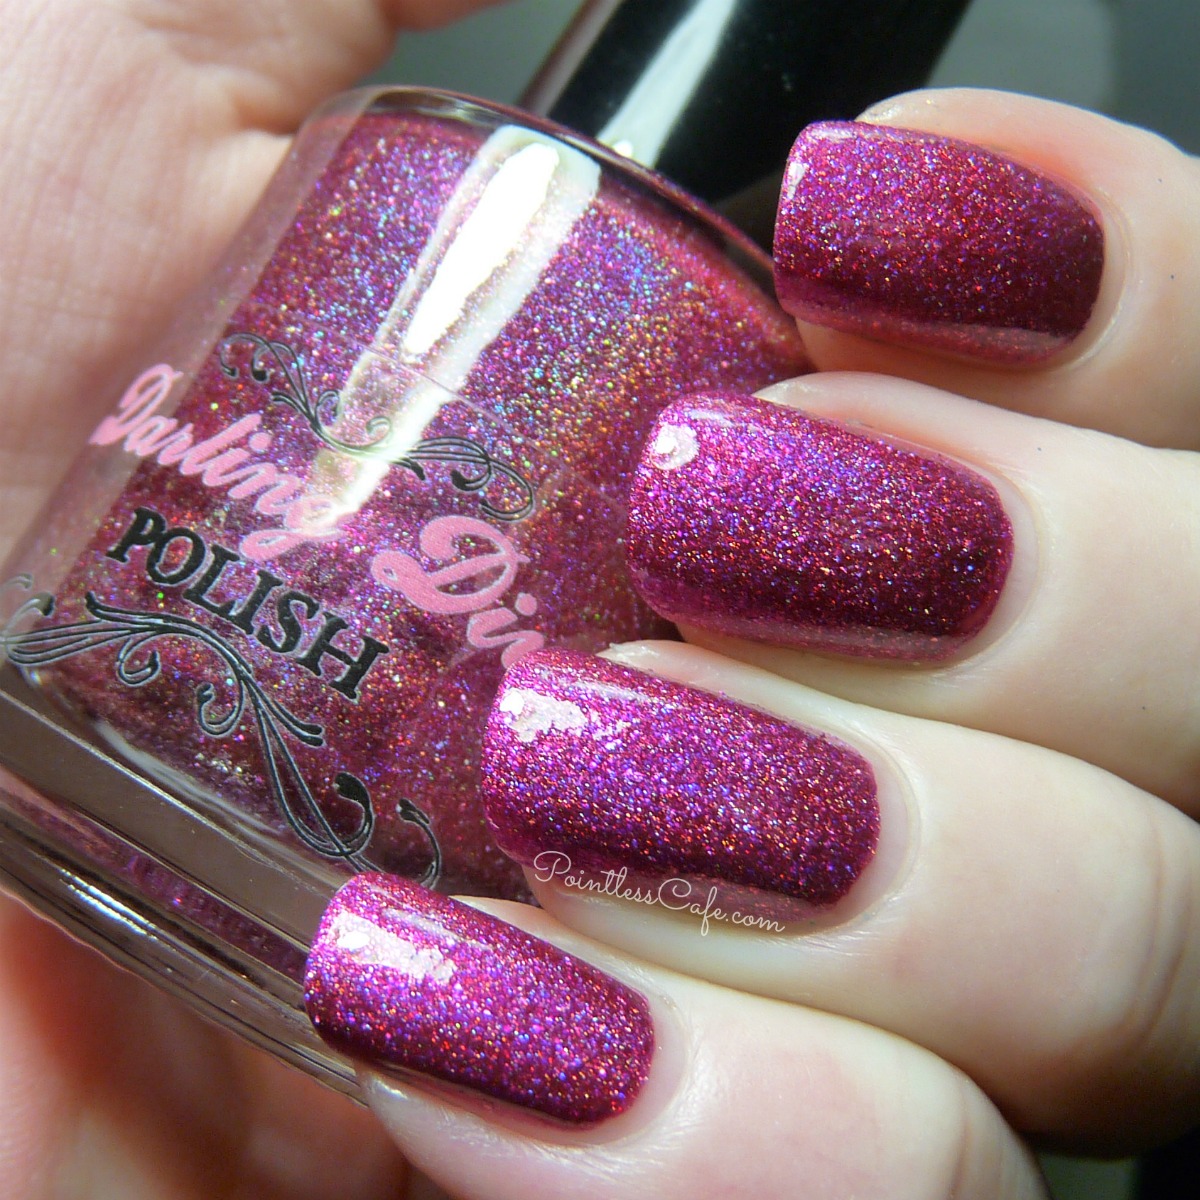 Darling Diva Polish: The Pageant Collection | Pointless Cafe